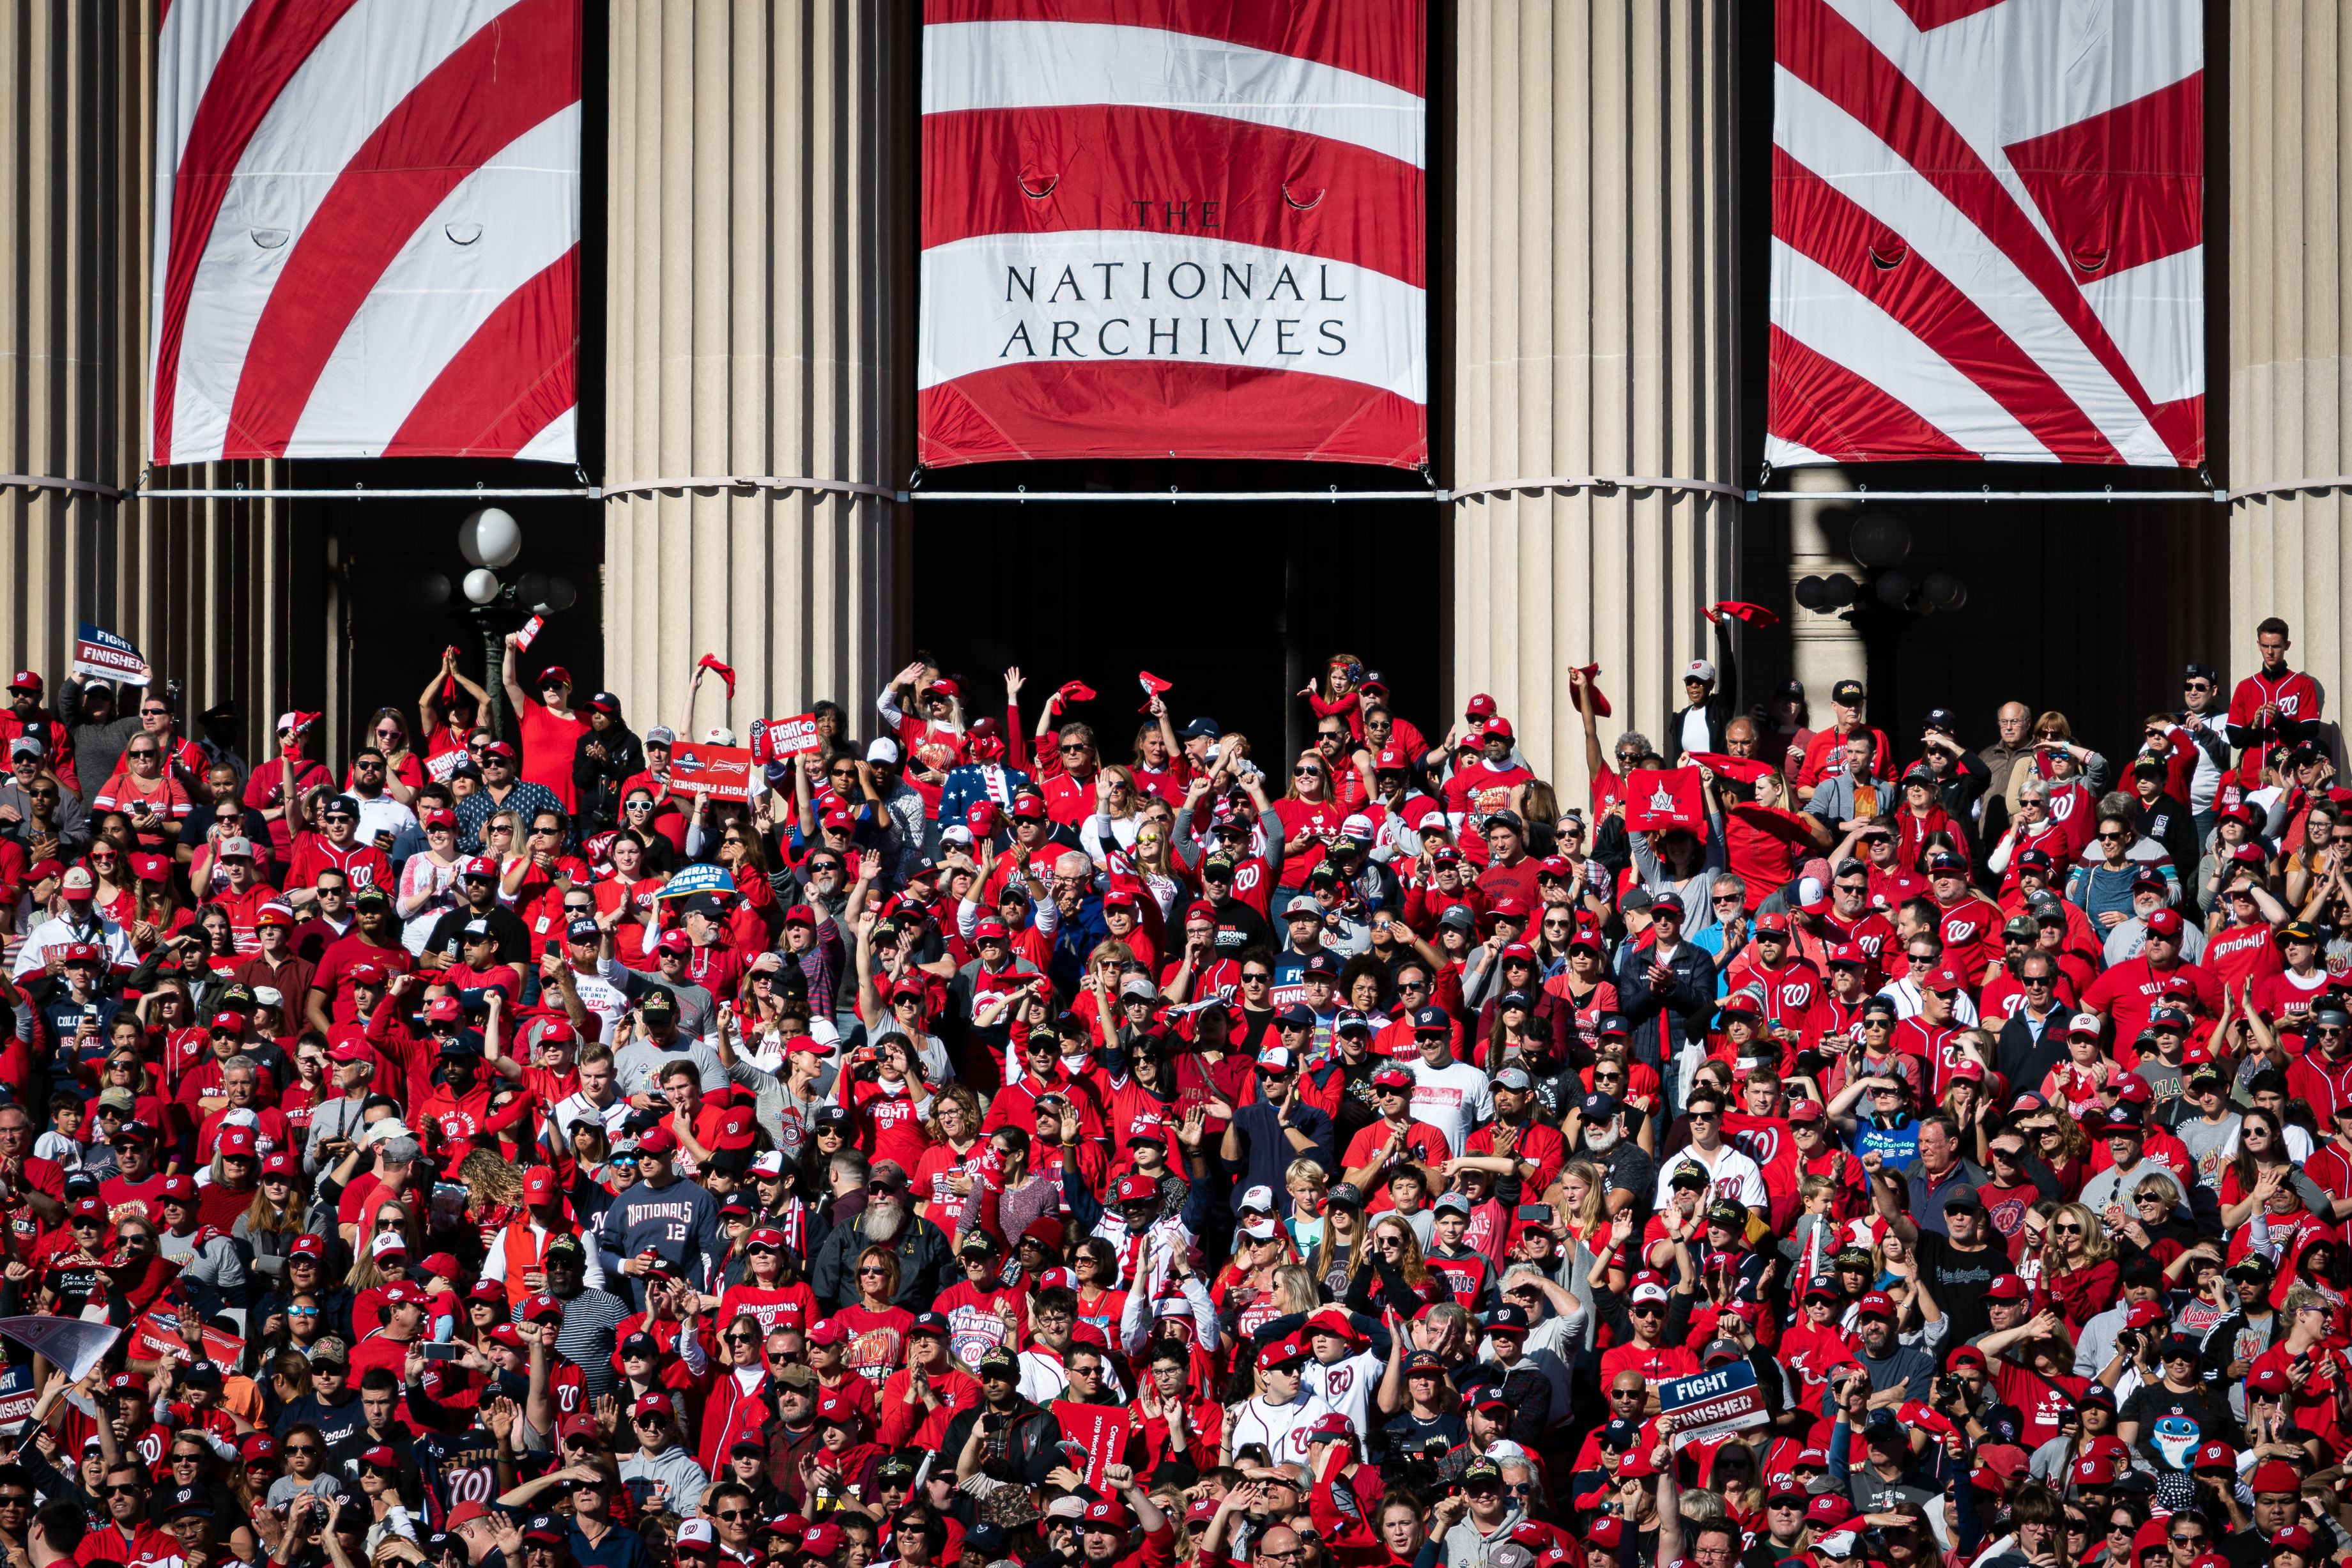 We are the District of Champions': Thousands pack DC for Nationals